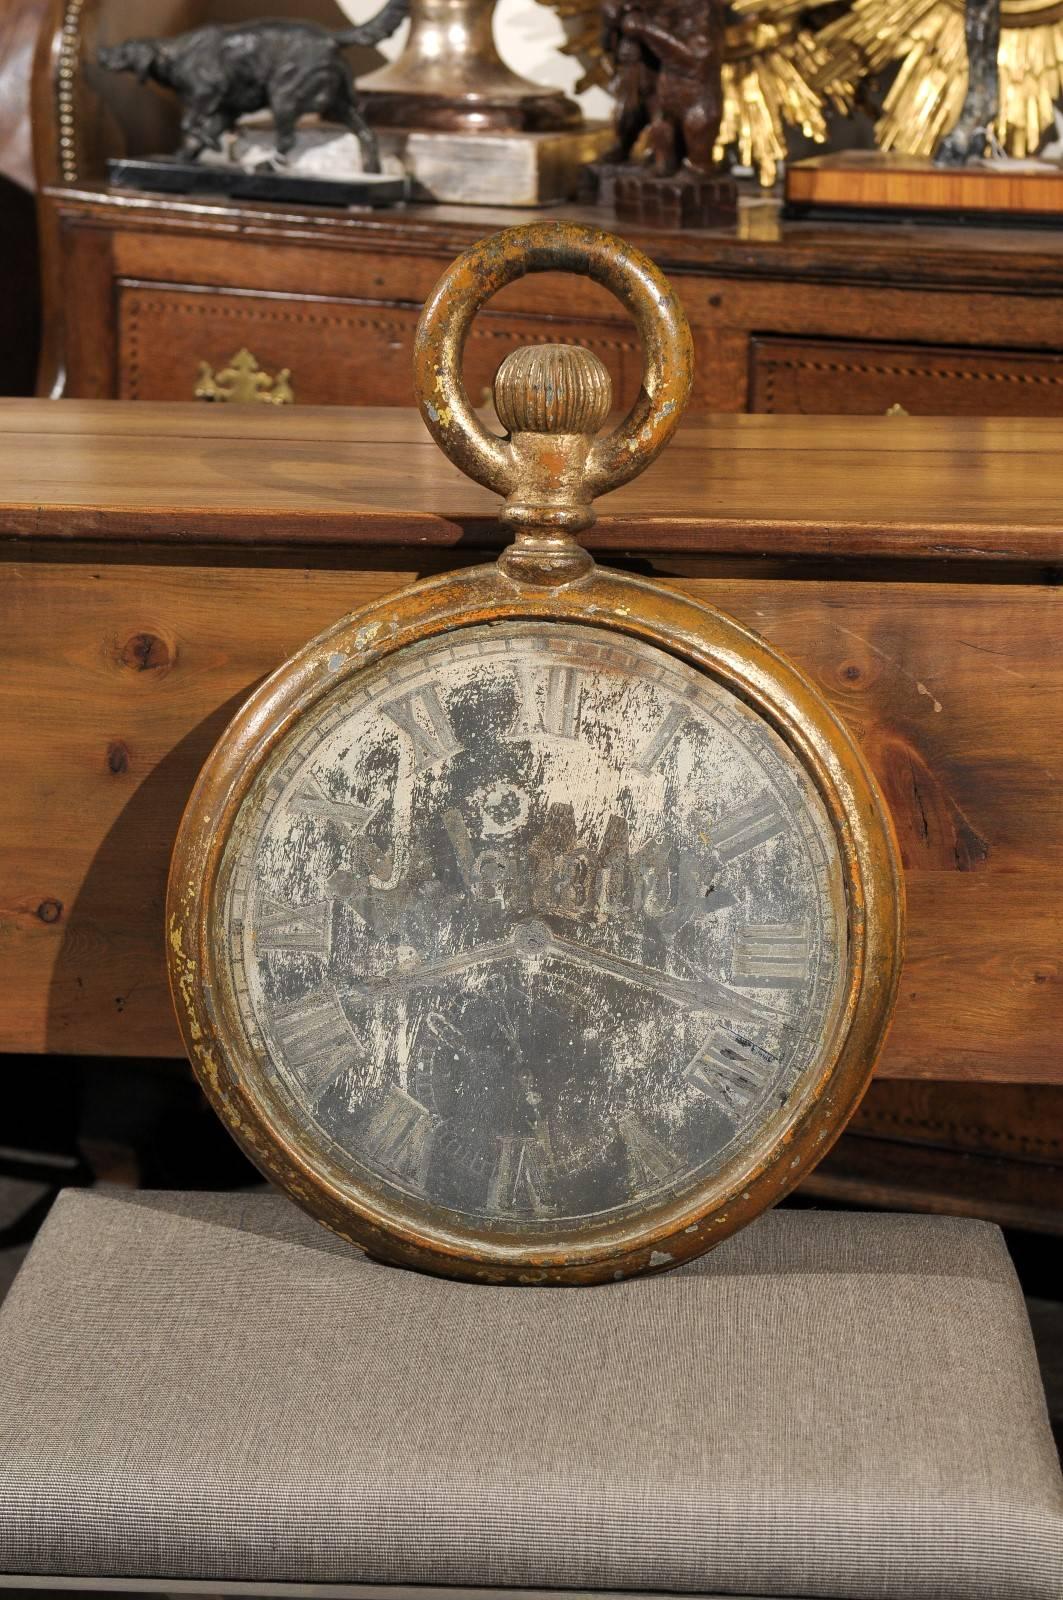 An exquisite French late 19th century tole trade sign depicting an oversized pocket watch. This French clock face trade sign is made of tole with a gilded iron circular bow at the top. This turn of the century trade sign is painted on both sides